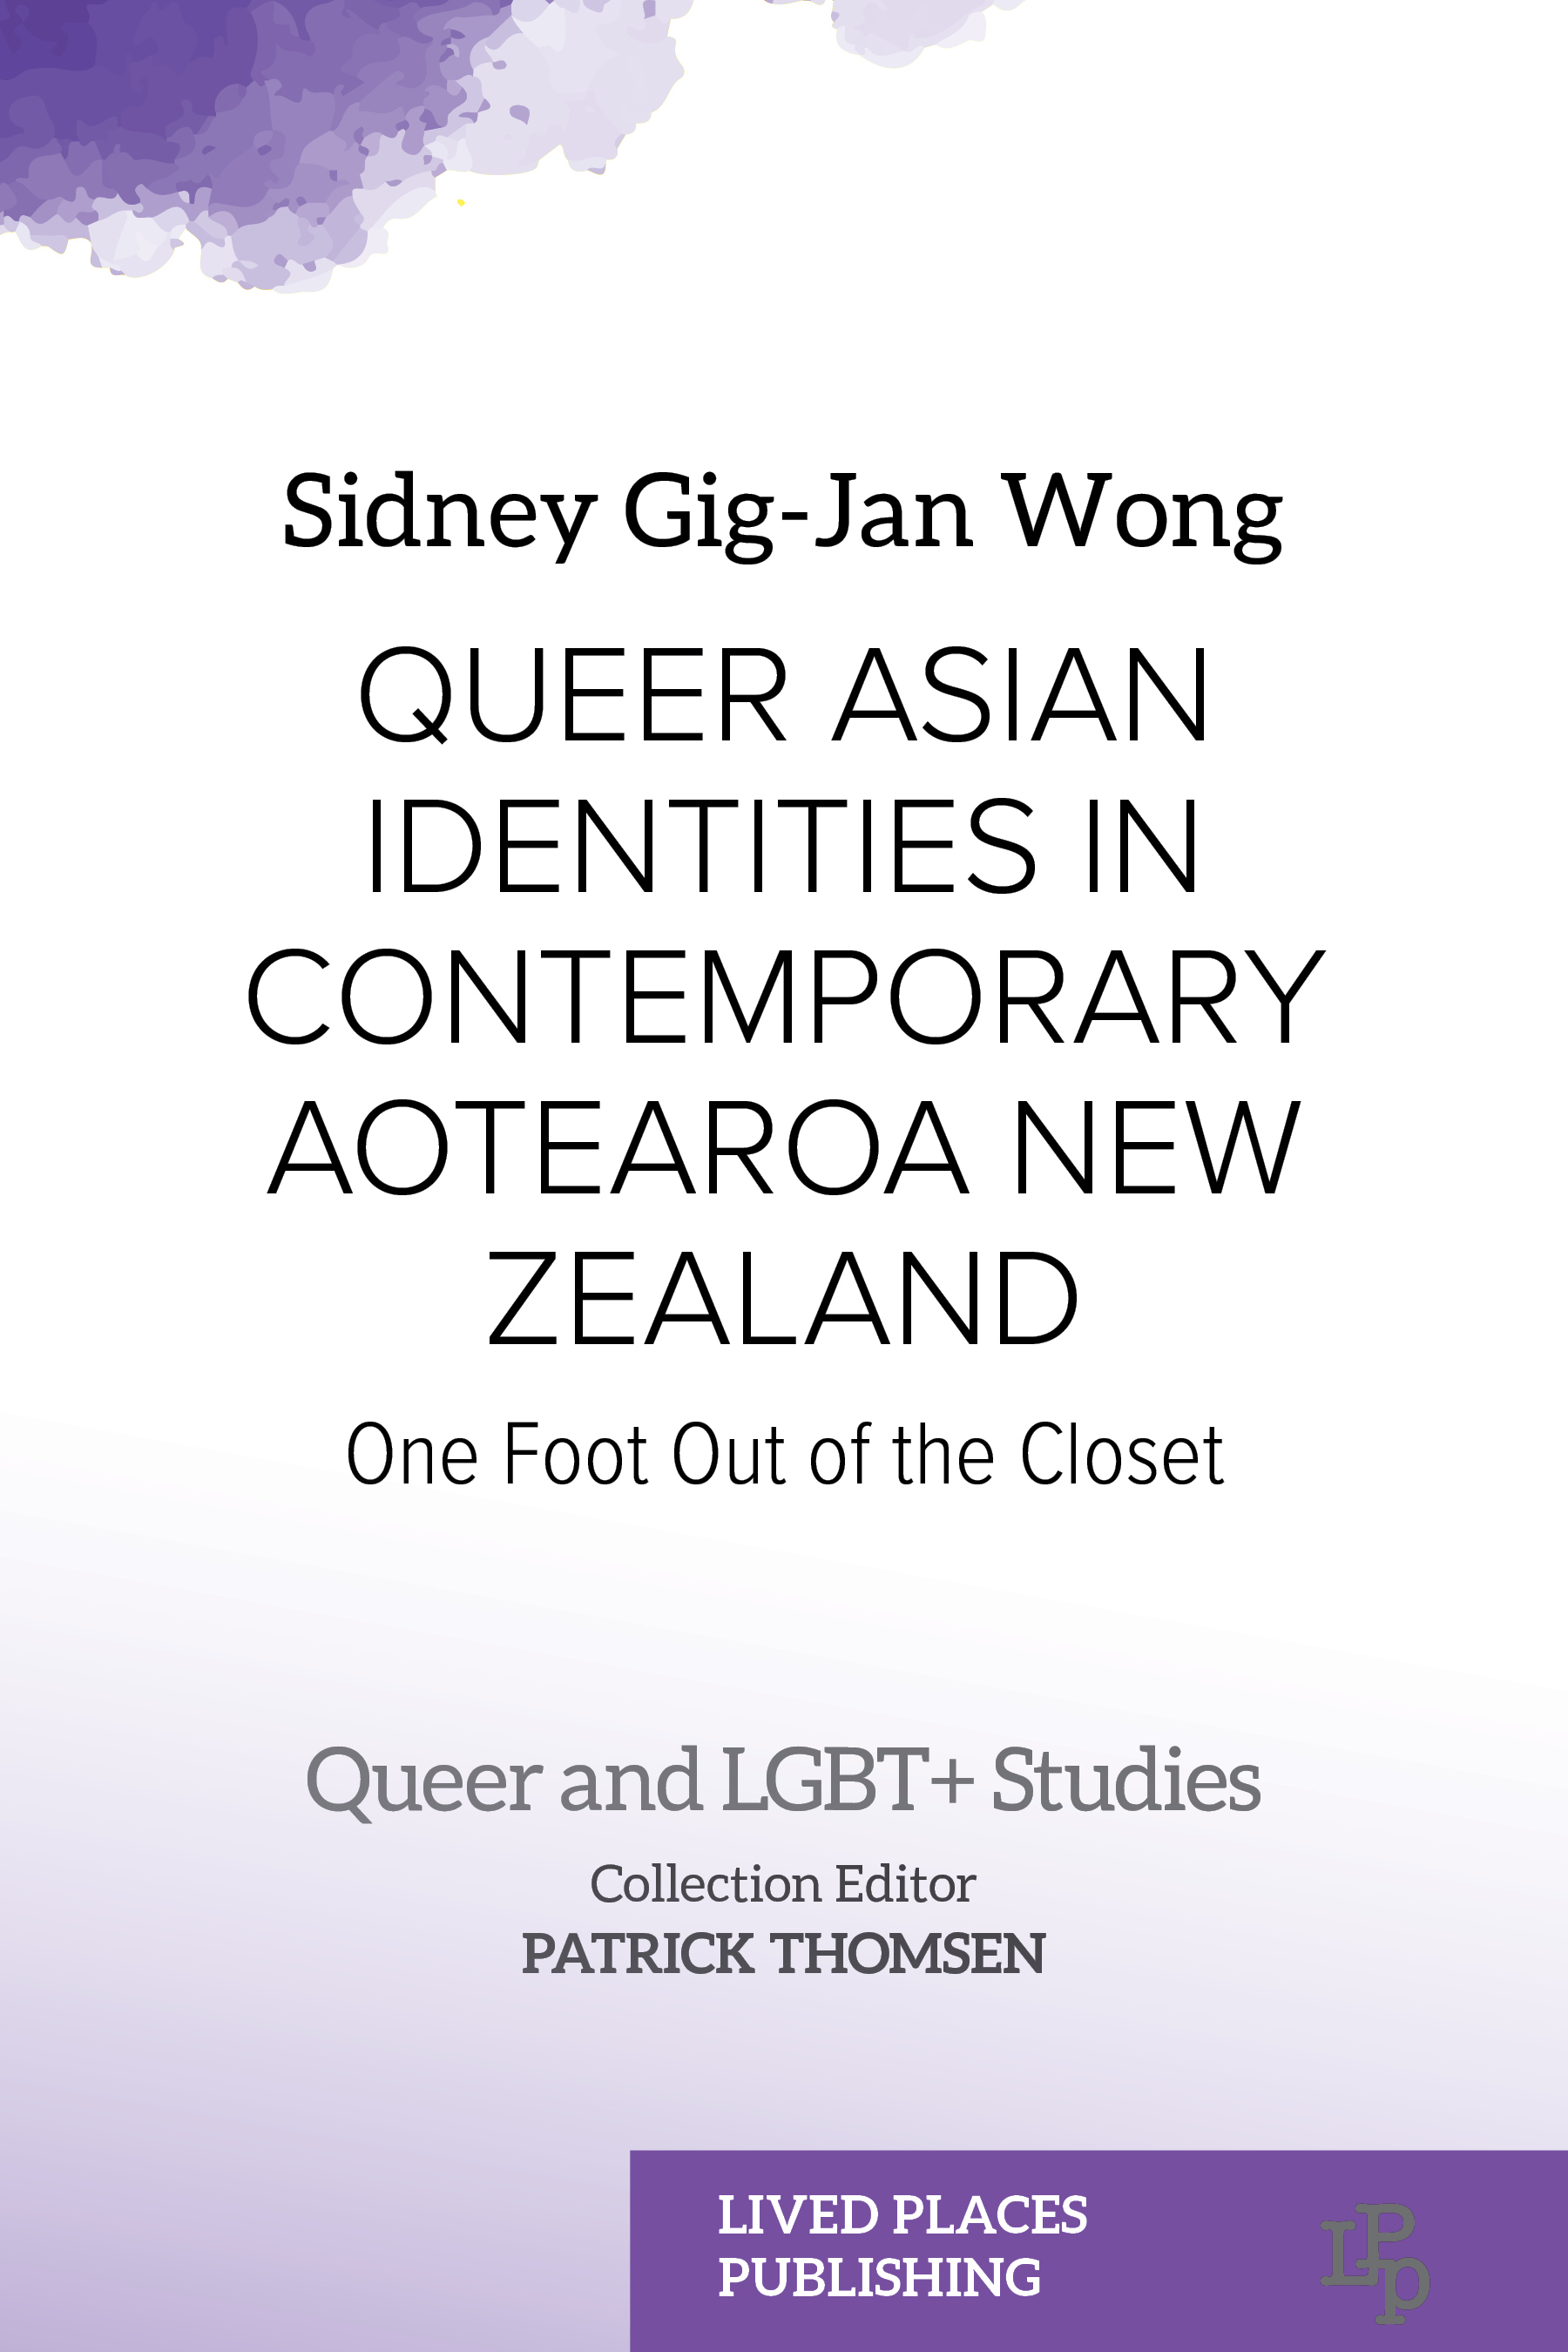 Queer Asian Identities in Contemporary Aotearoa New Zealand